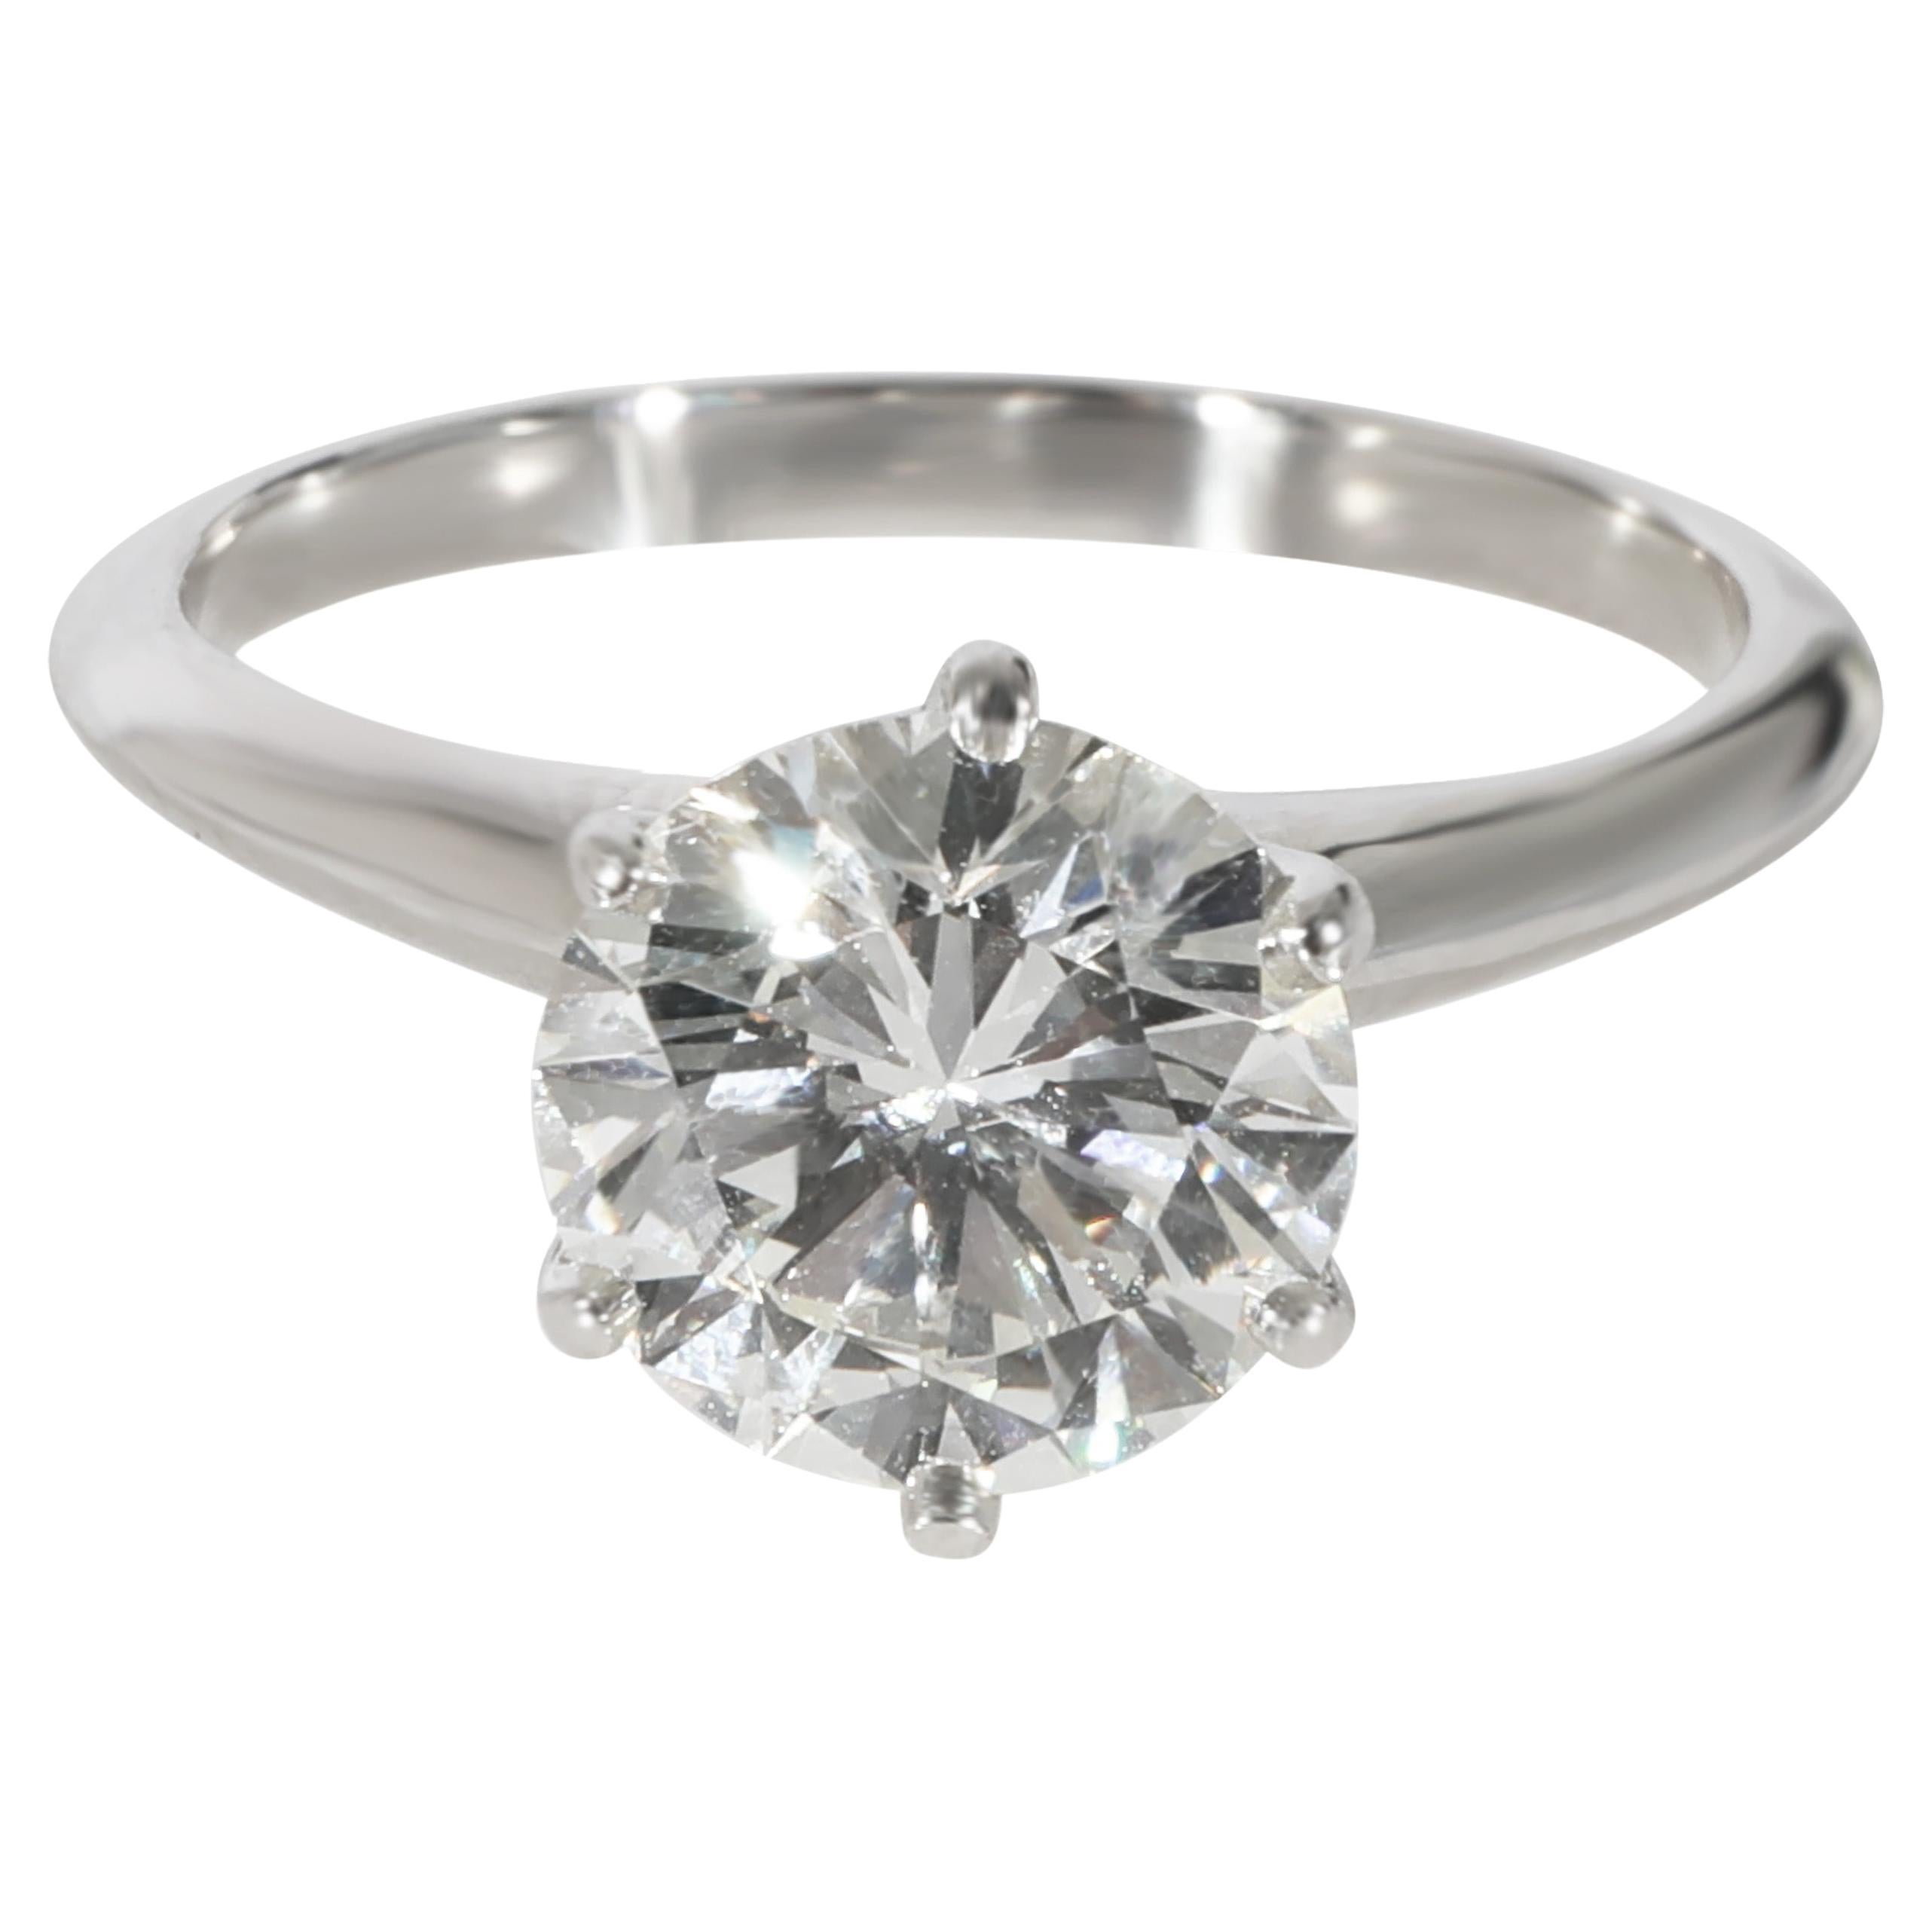 Tiffany & Co. Diamant solitaire  Engagement  Sonneries  Platine I VS1 2,17 carats